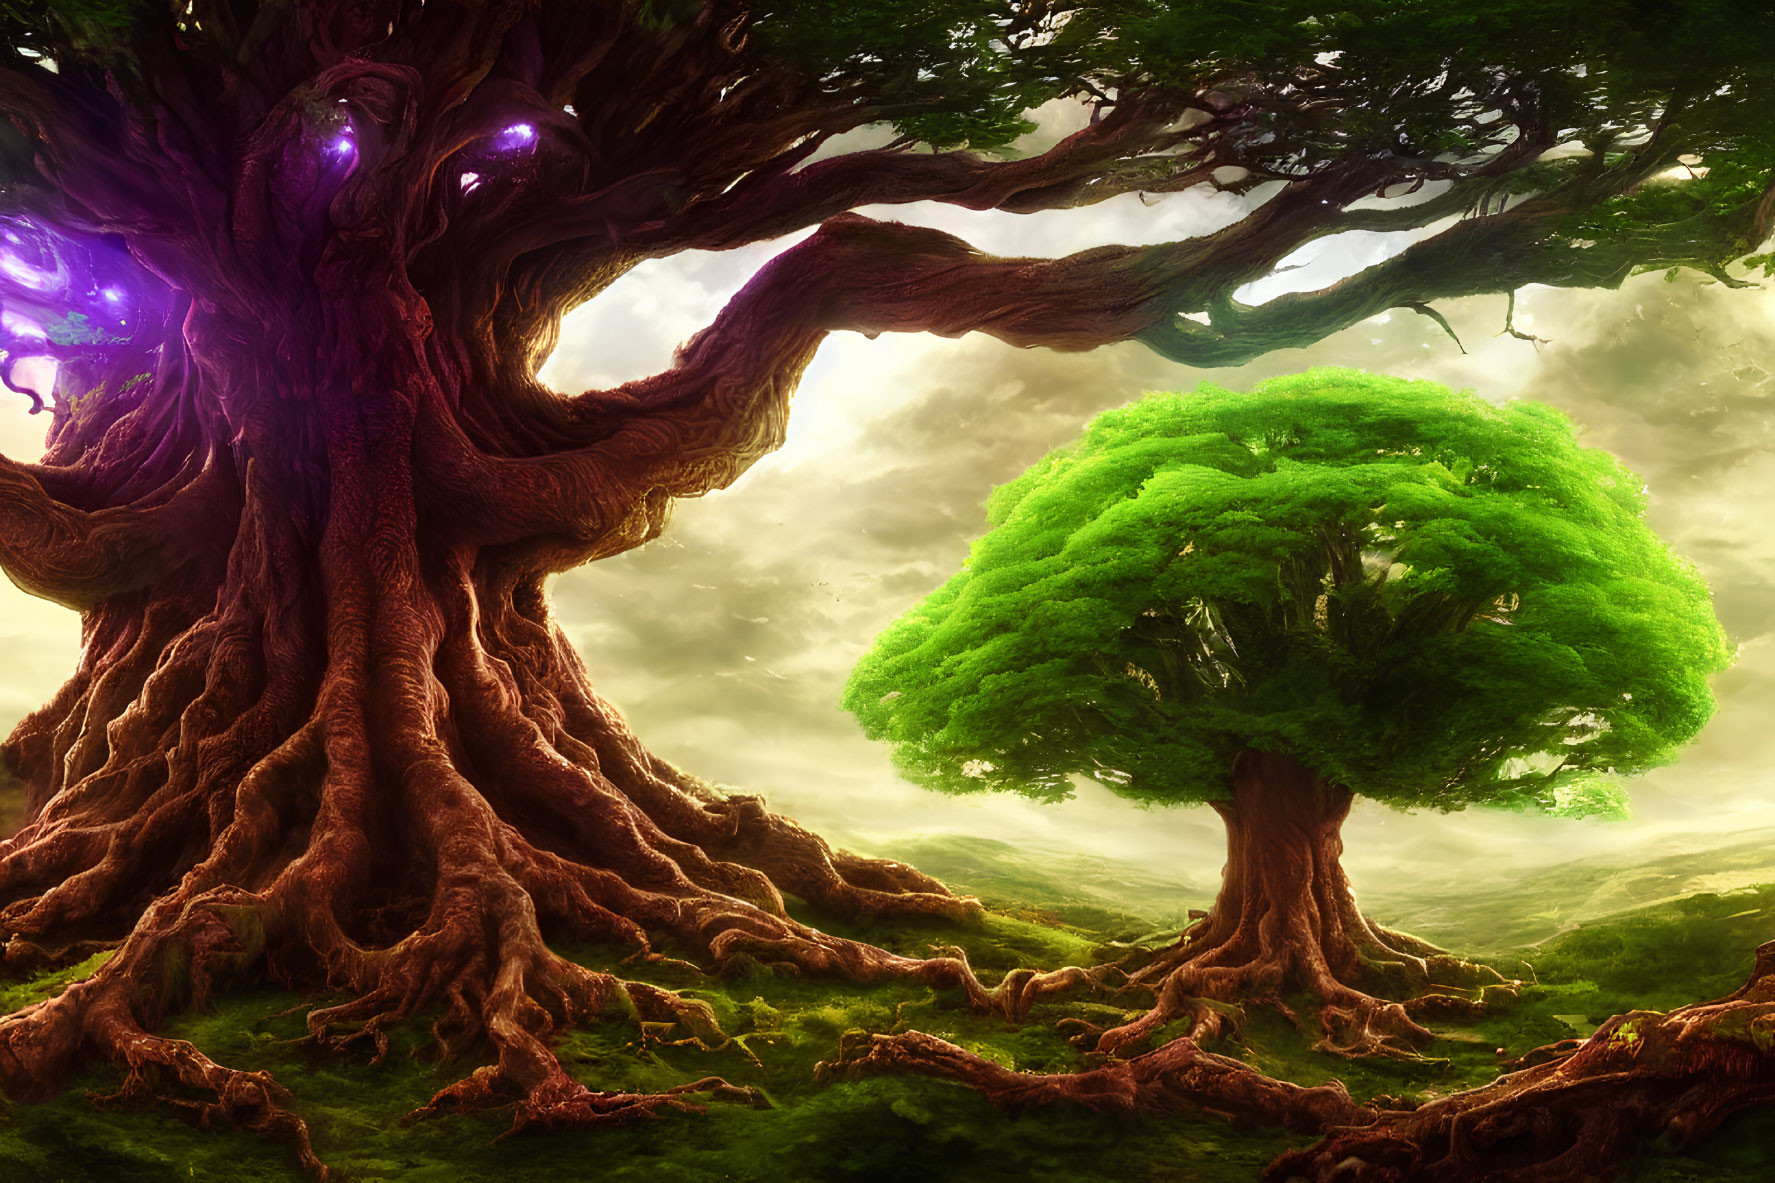 Majestic large and small trees in vibrant green landscape with purple light.